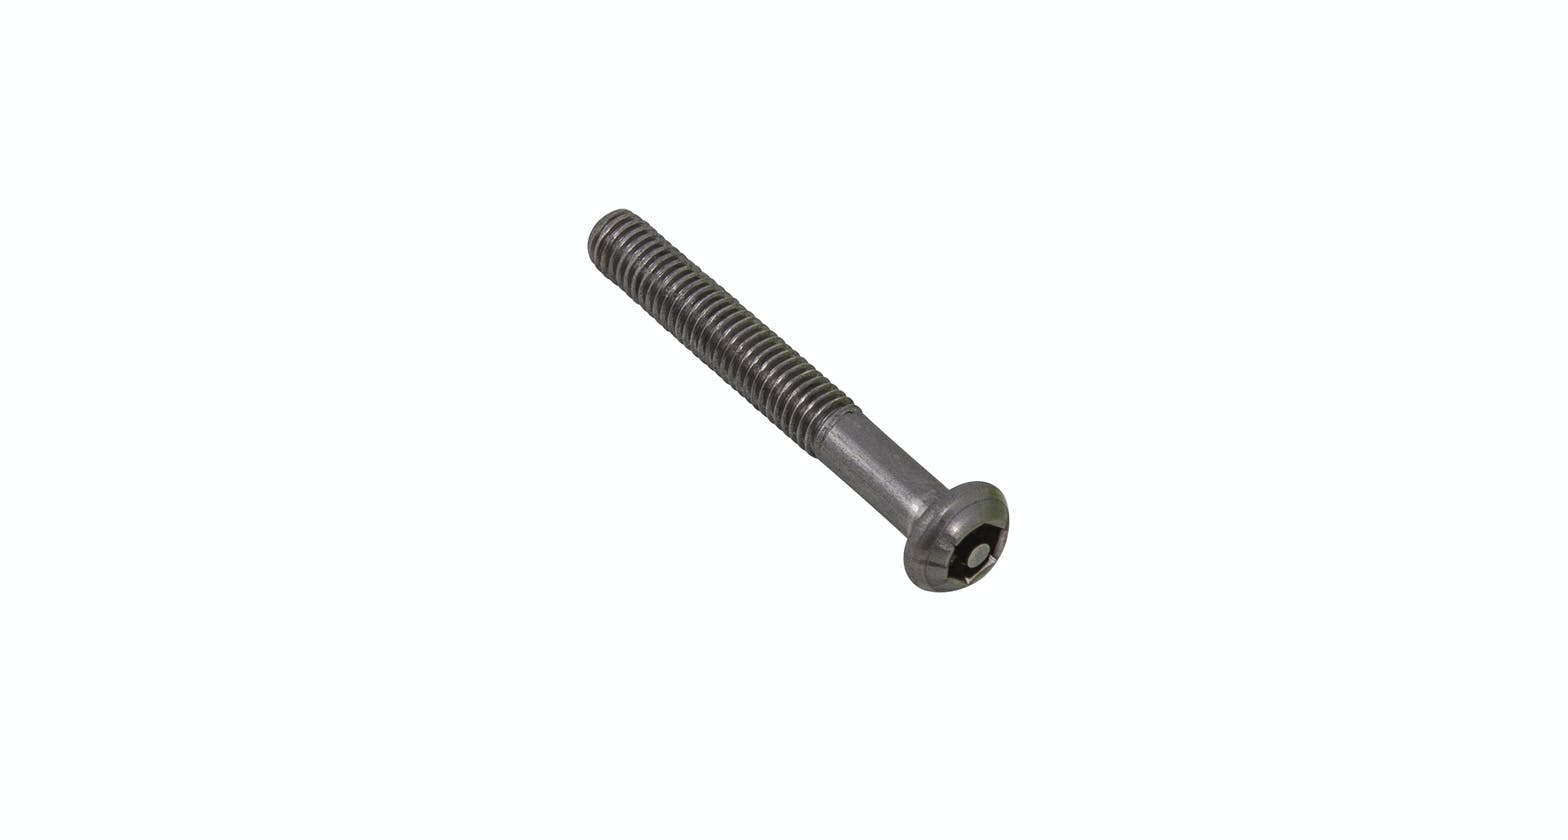 Rhino-Rack B091-BP M6 x 45mm Button Head Security Screw (Stainless Steel) (6 Pack)